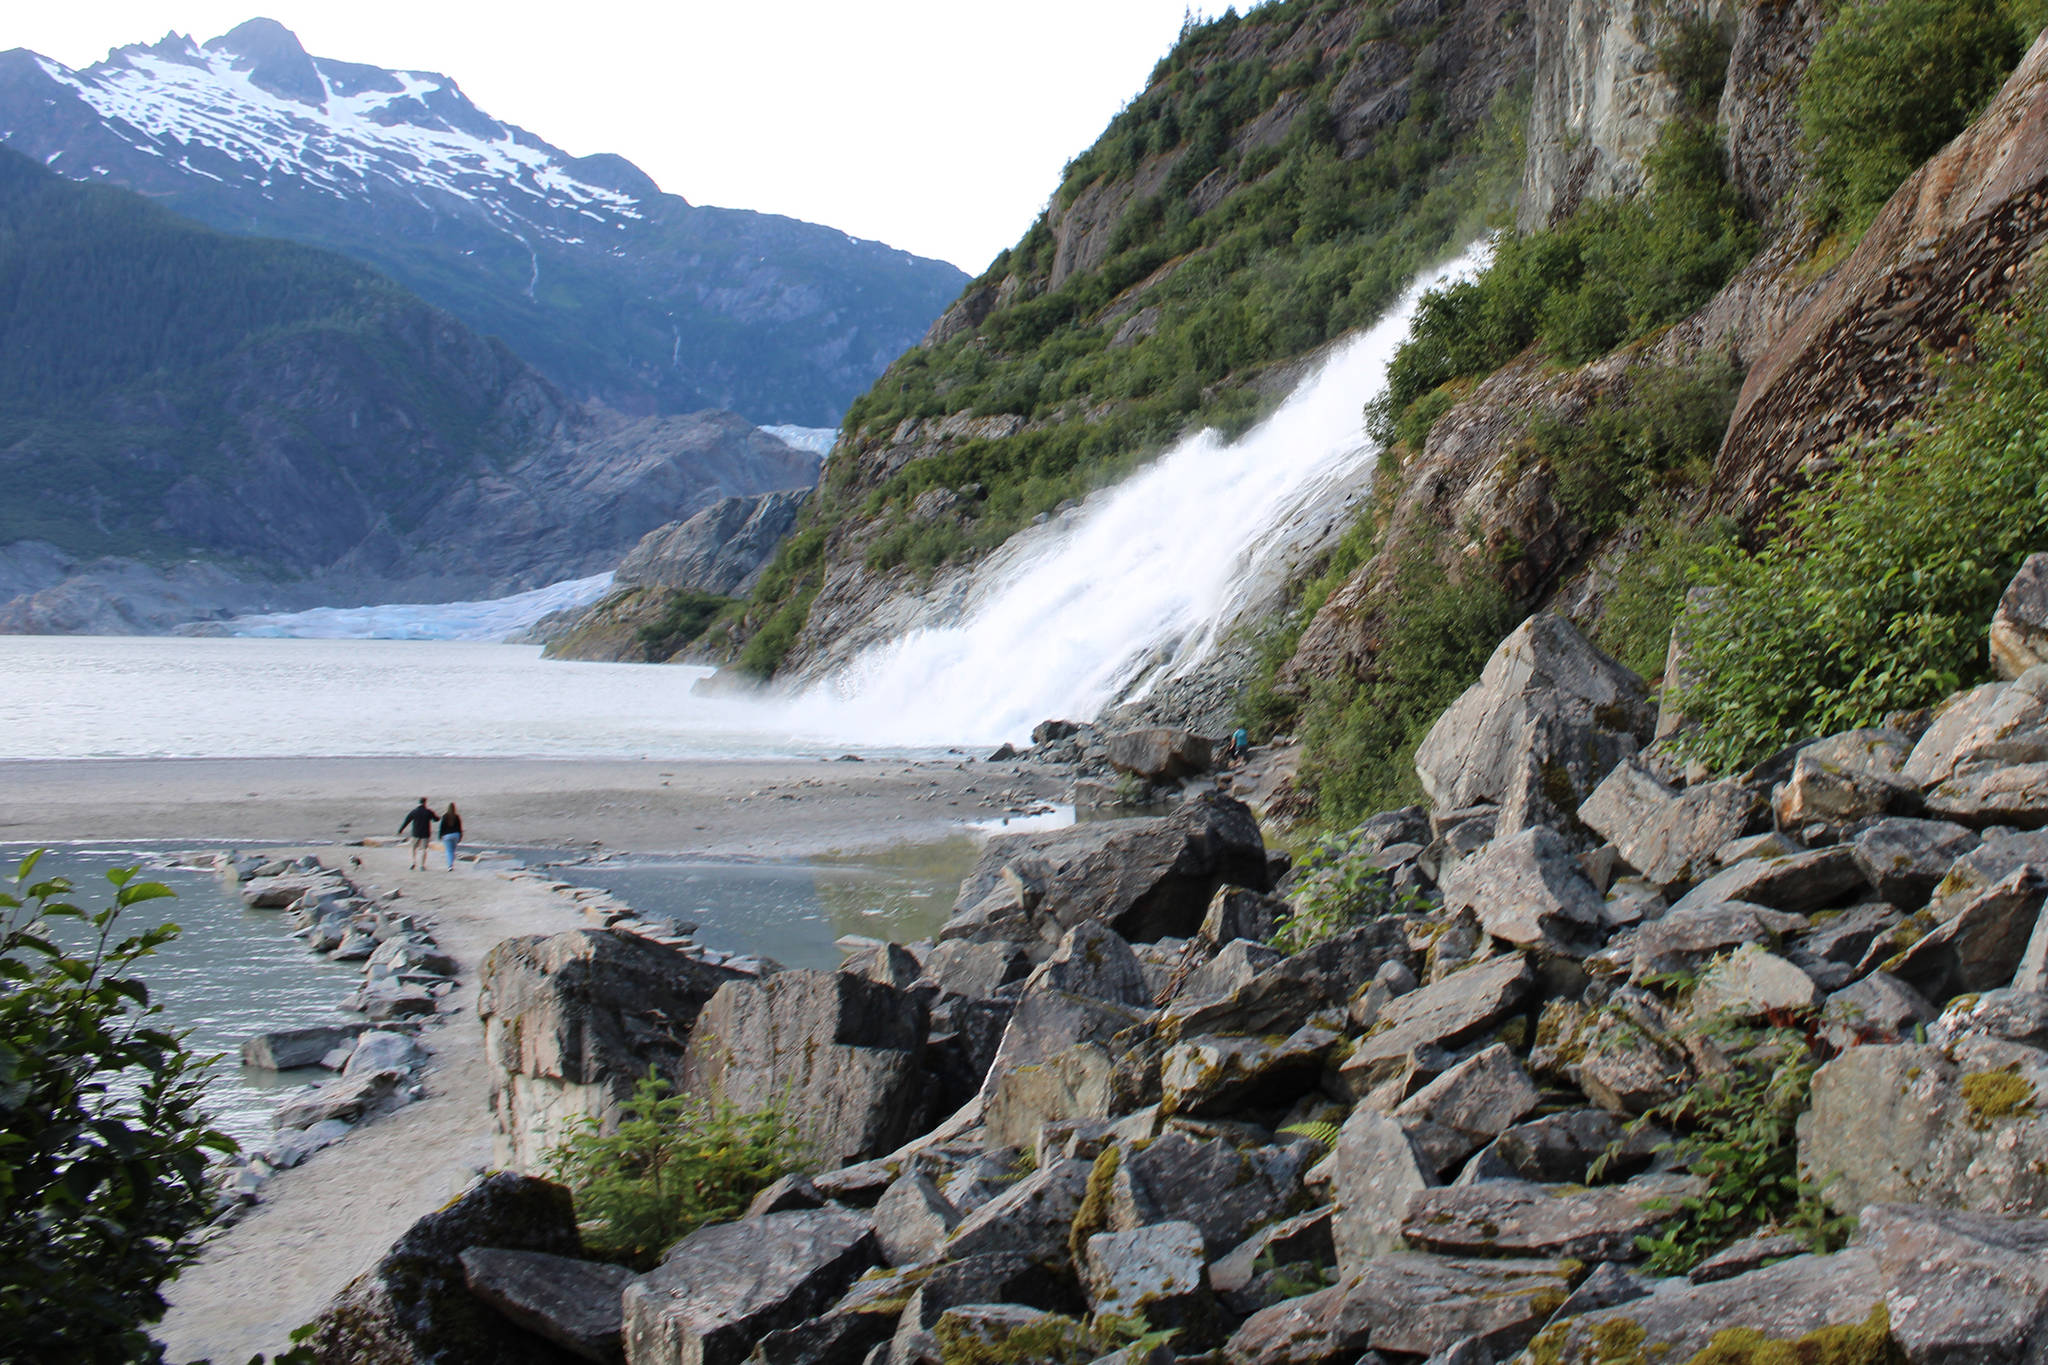 People walk near Nugget Falls Thursday, July 30, 2020. A flood warning is in effect for Mendenhall Lake and Mendenhall River through 10 a.m. Saturday, Aug. 1, 2020. As water levels rise, recreation sites near the glacier may be hazardous or inaccessible. (Ben Hohenstatt / Juneau Empire)